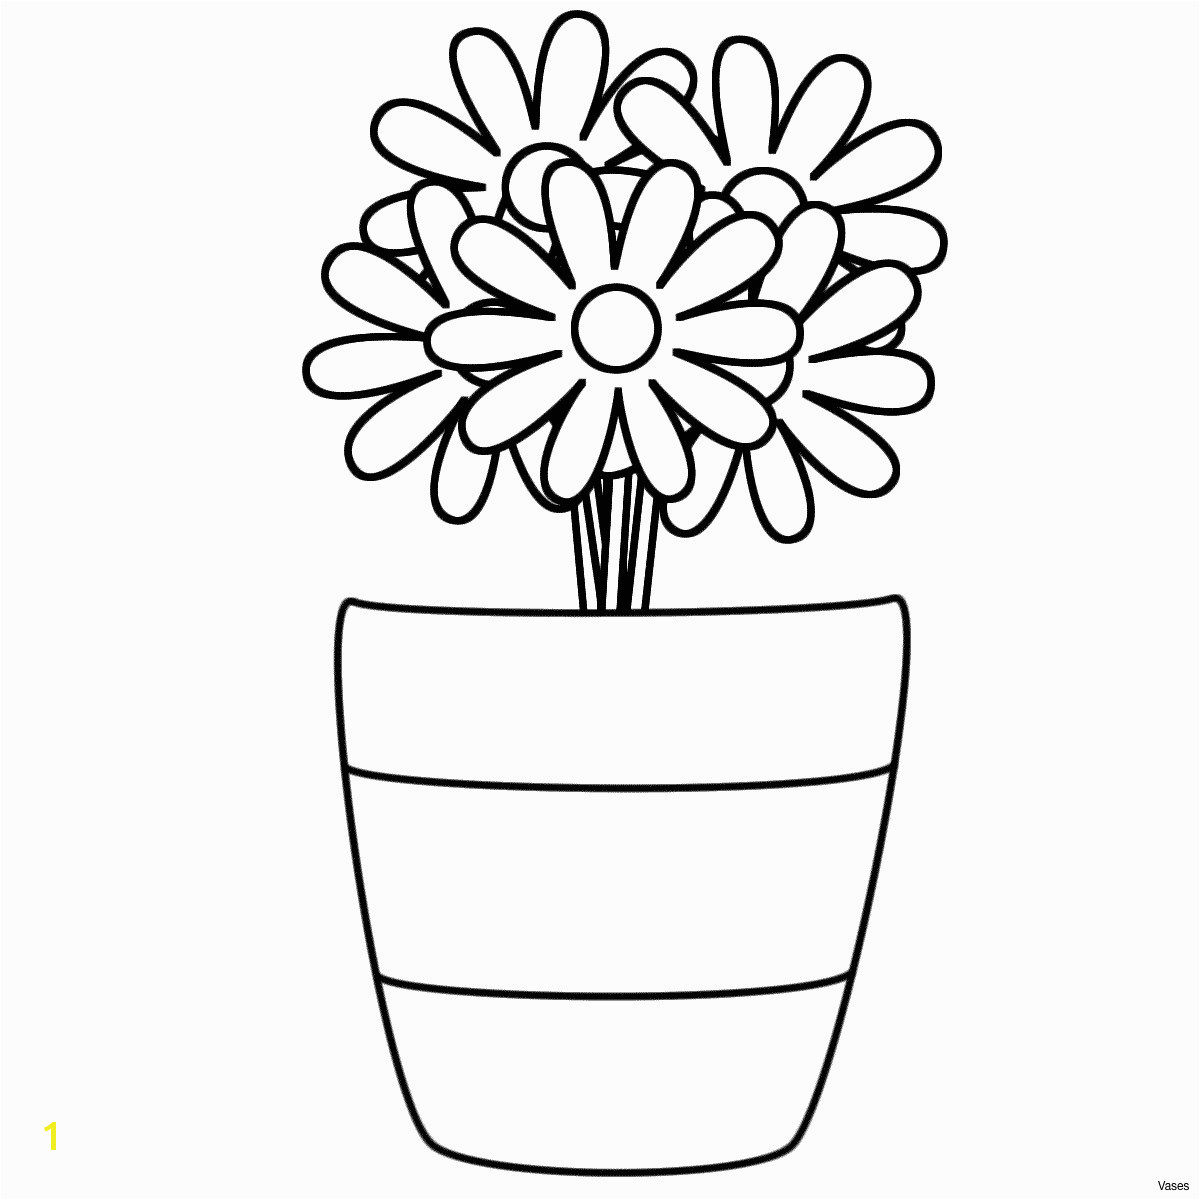 Care Bear Coloring Pages Care Bears Coloring Pages Best Vases Flower Vase Coloring Page